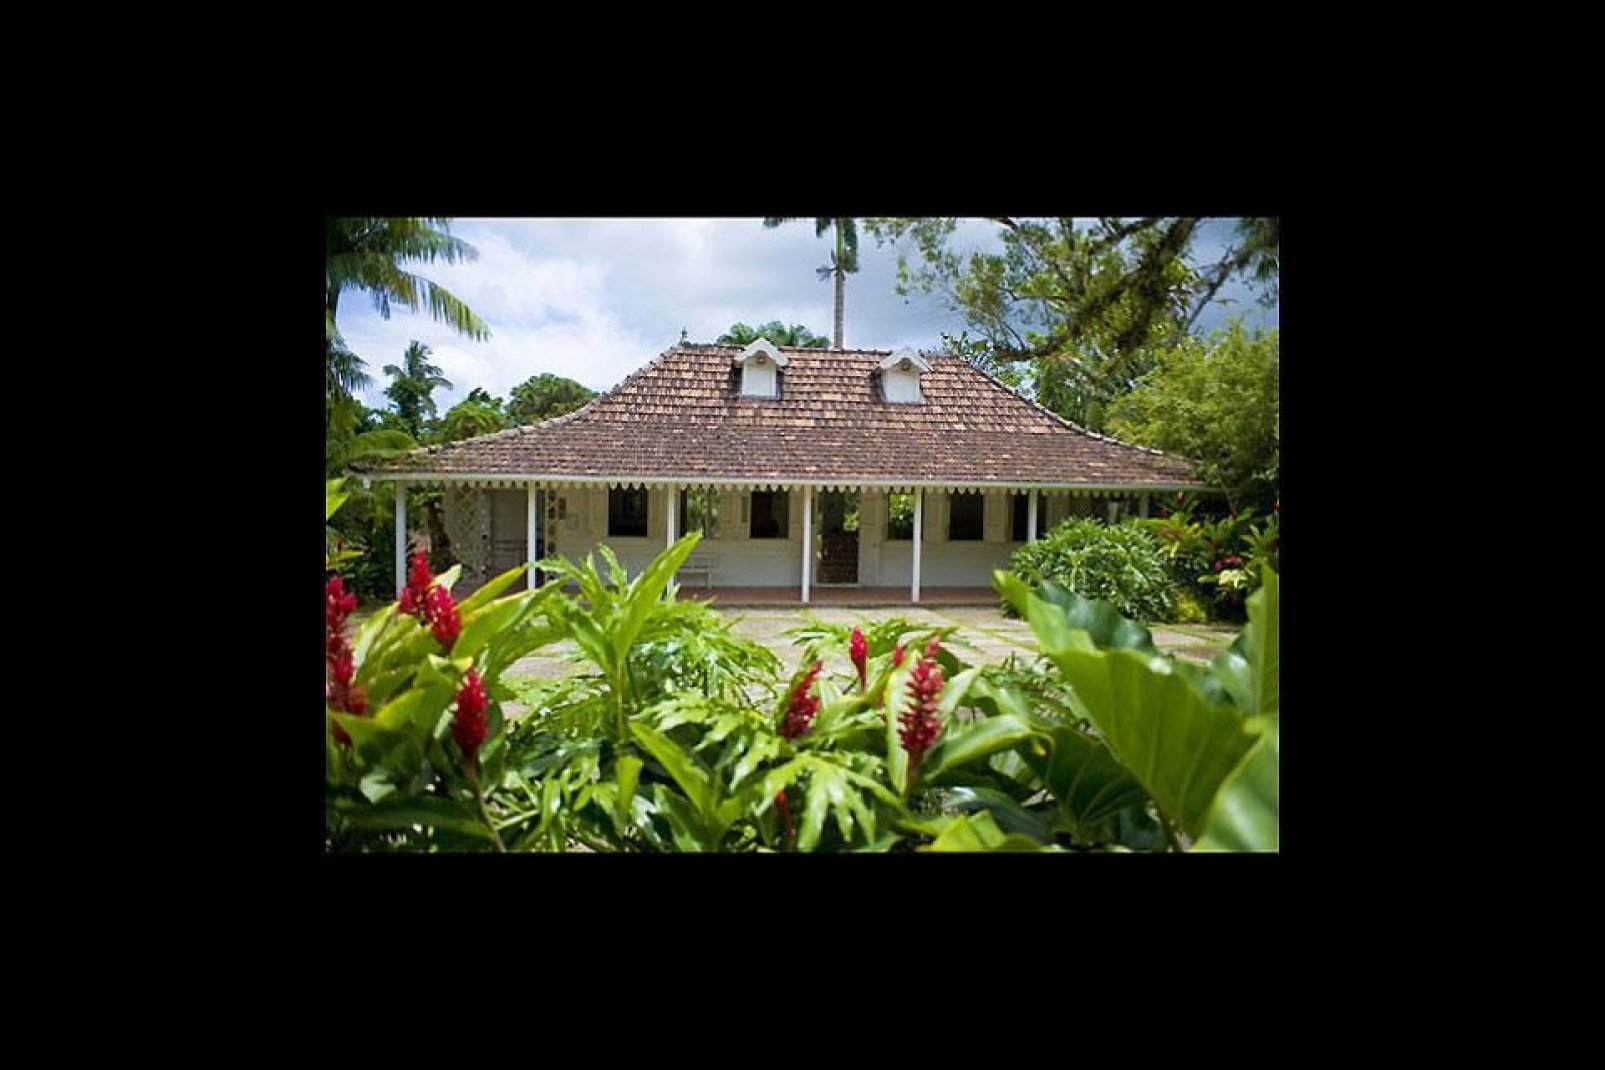 The Regional Museum of History and Ethnography of Martinique is housed in a beautiful 19th century bourgeois house.